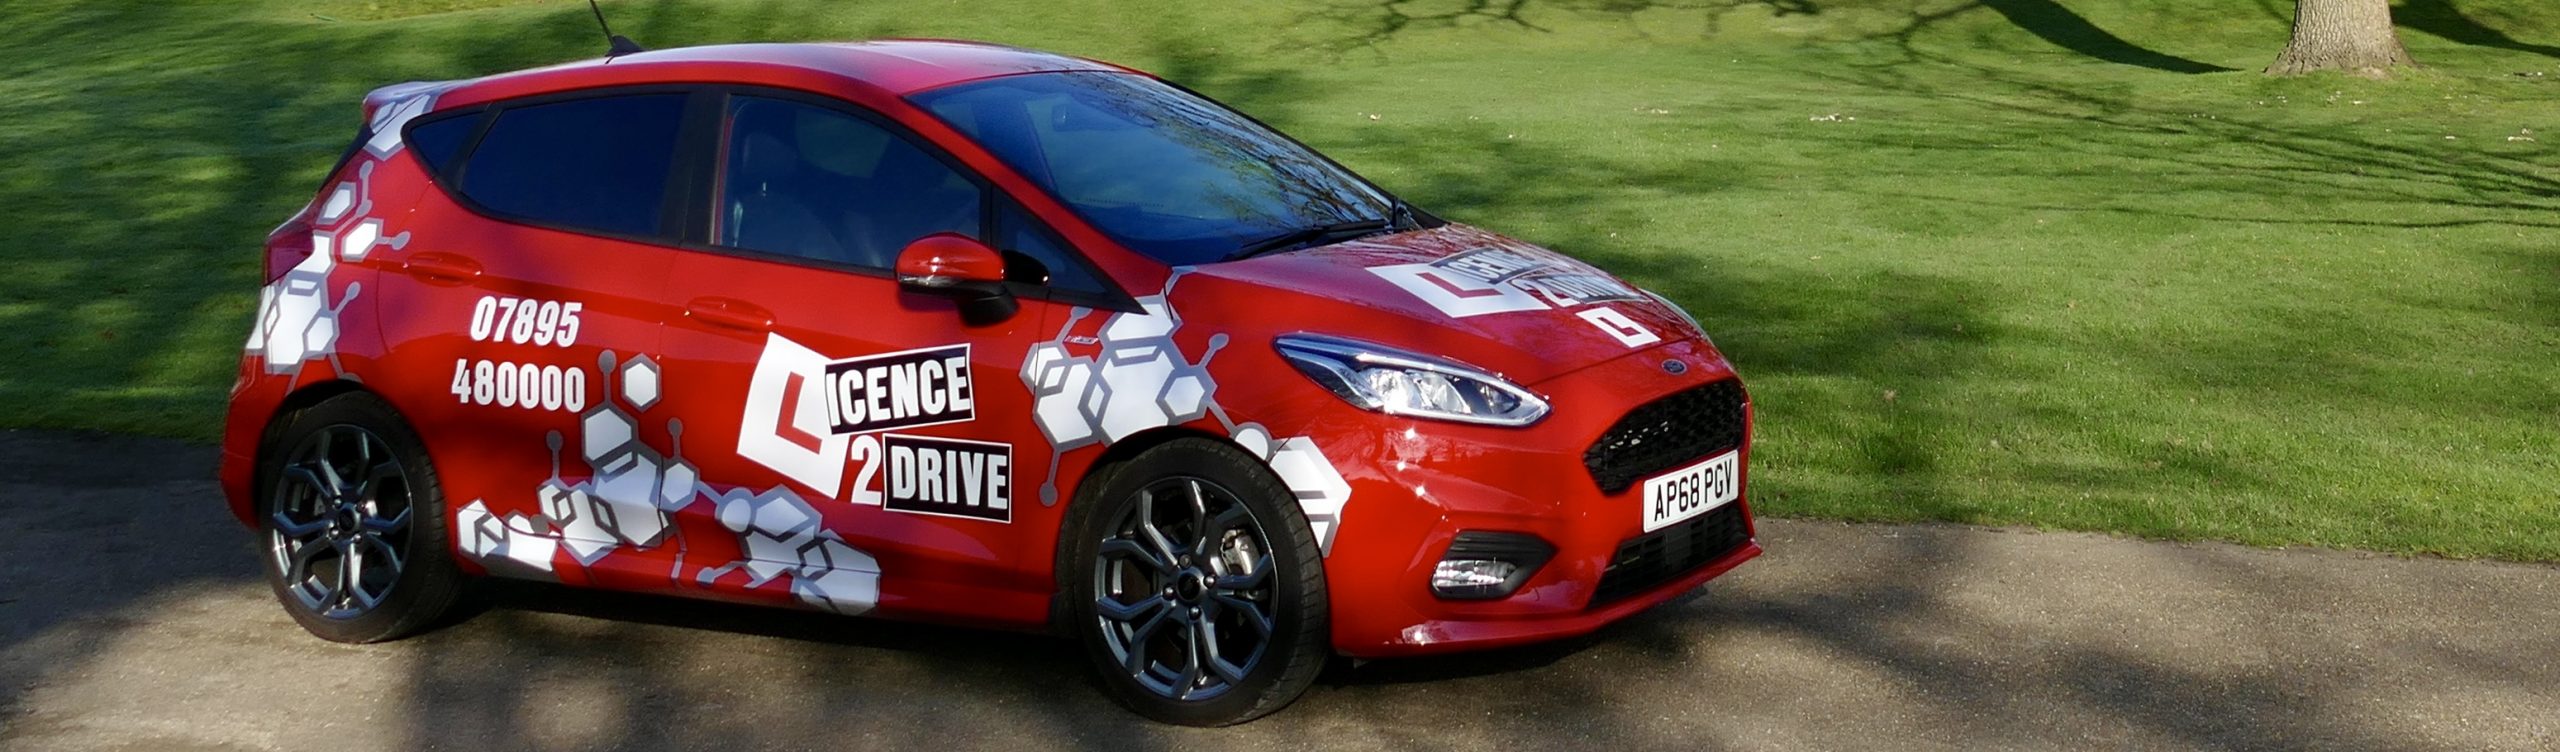 Licence2Drive car at Sprowston Mannor